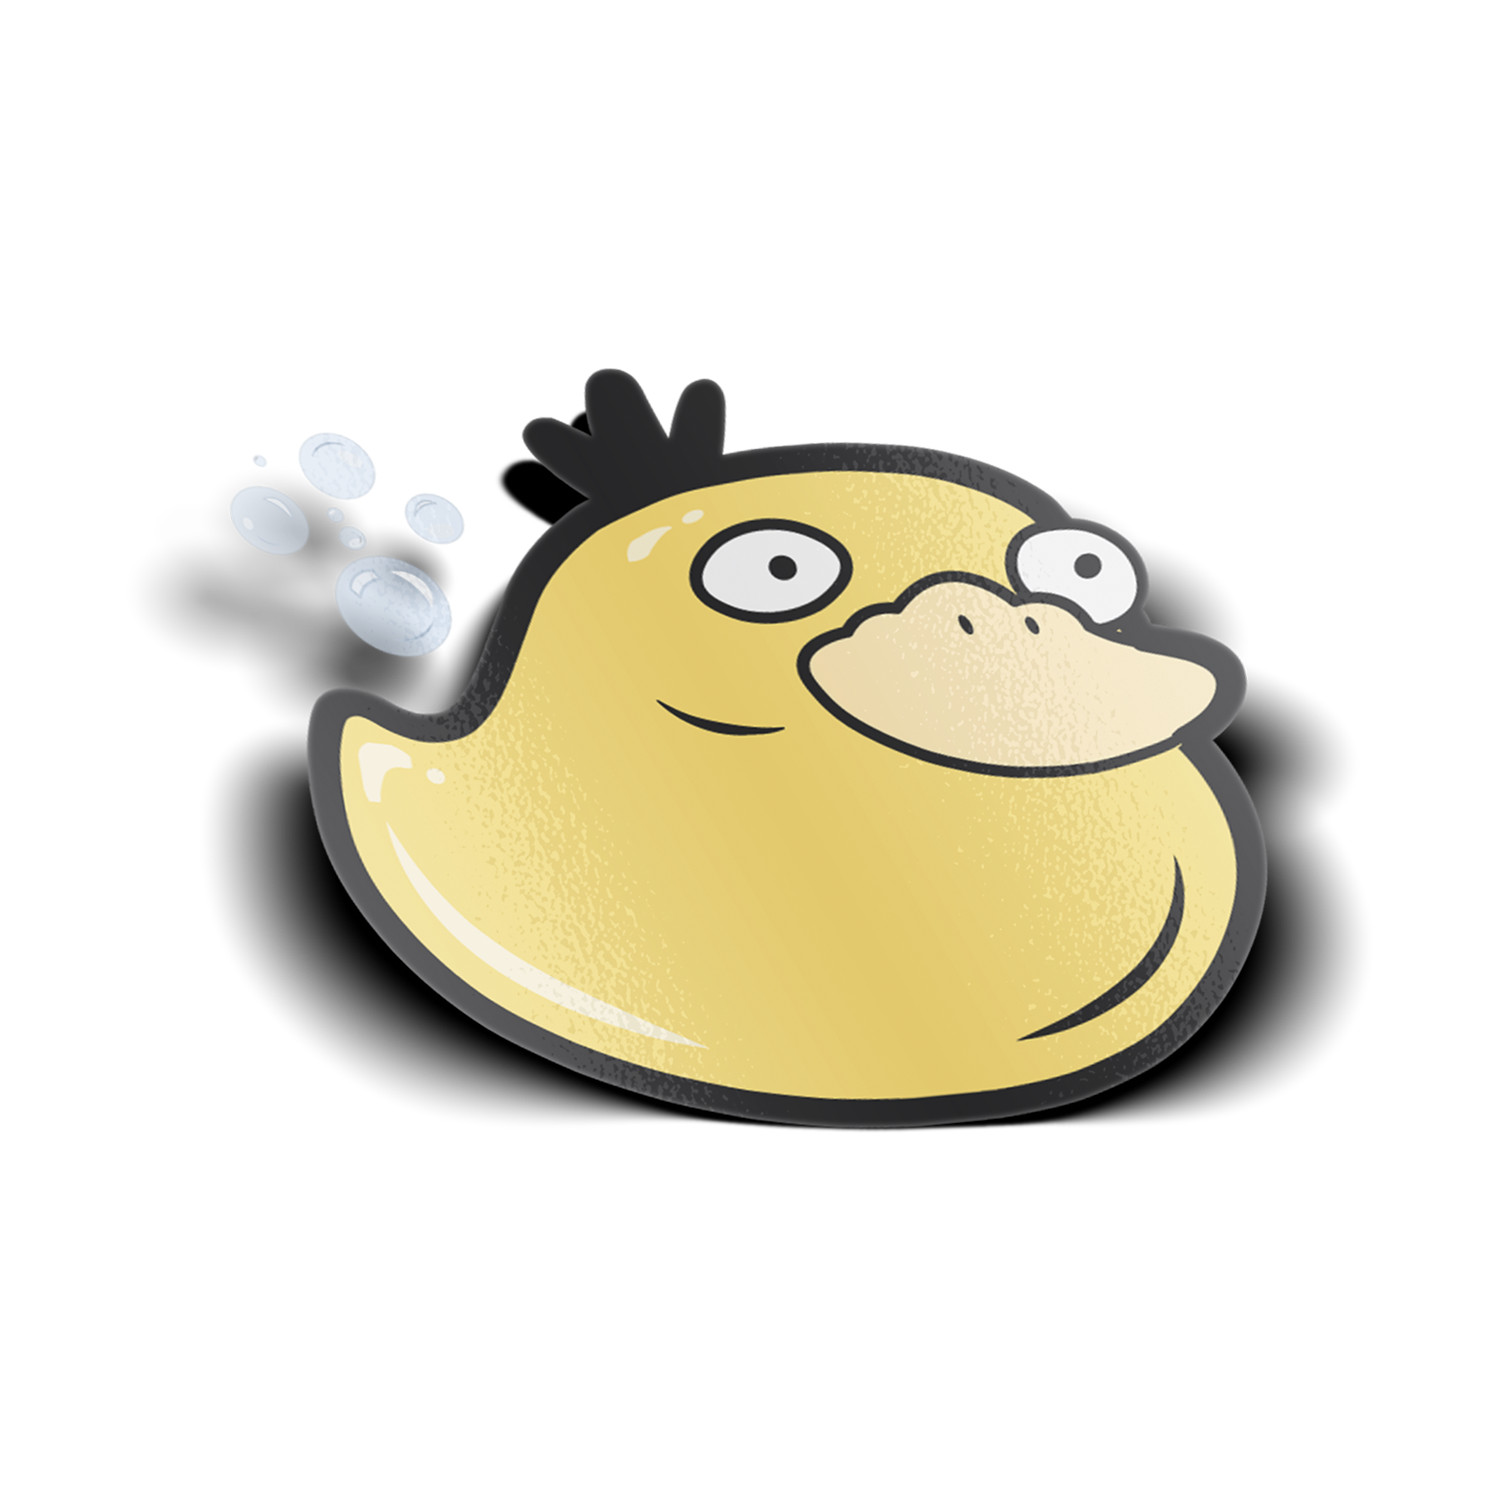 Rubber Psyducky Sticker design features Pokemon Psyduck as a rubber ducky with some bubbles.